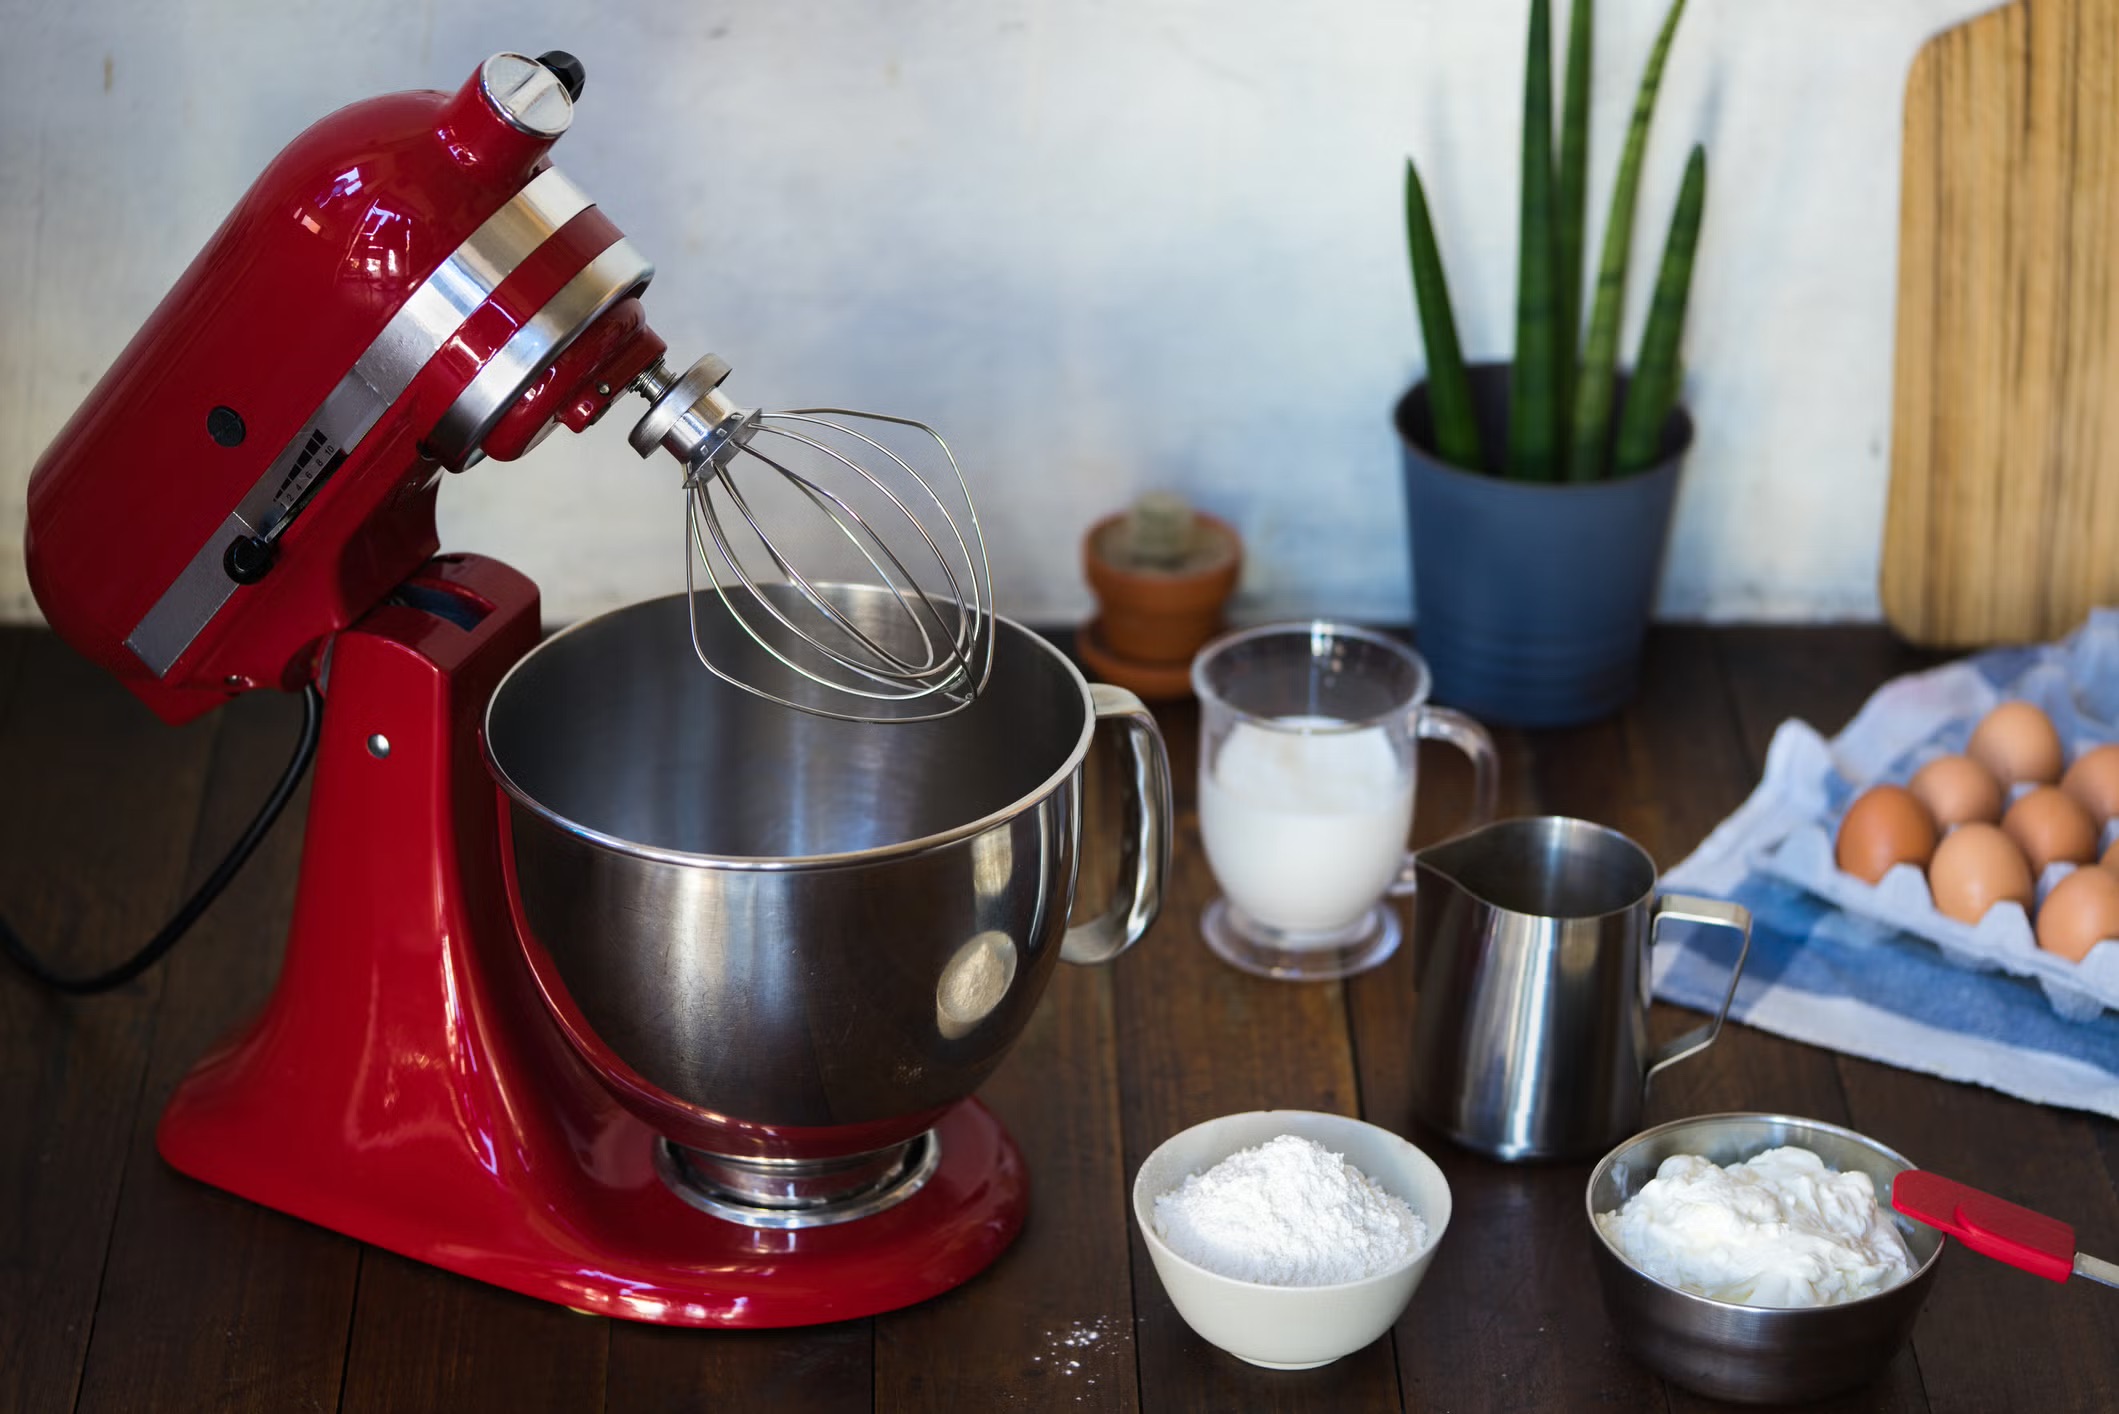 What Can I Make With A Stand Mixer